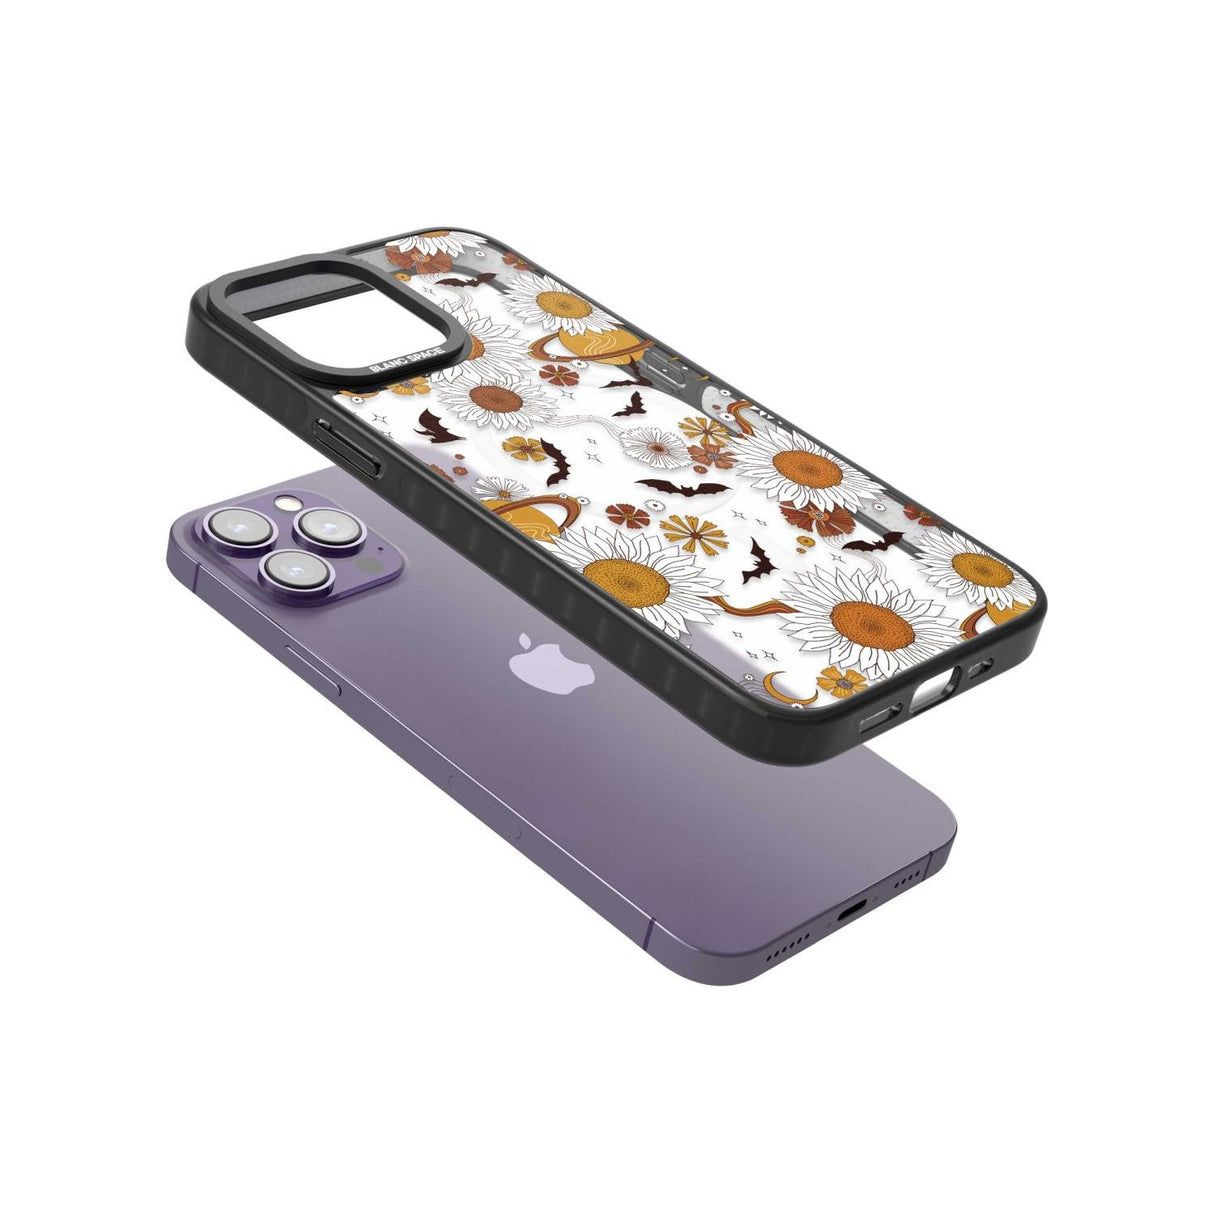 Halloween Bats and Planets Phone Case iPhone 15 Pro Max / Black Impact Case,iPhone 15 Plus / Black Impact Case,iPhone 15 Pro / Black Impact Case,iPhone 15 / Black Impact Case,iPhone 15 Pro Max / Impact Case,iPhone 15 Plus / Impact Case,iPhone 15 Pro / Impact Case,iPhone 15 / Impact Case,iPhone 15 Pro Max / Magsafe Black Impact Case,iPhone 15 Plus / Magsafe Black Impact Case,iPhone 15 Pro / Magsafe Black Impact Case,iPhone 15 / Magsafe Black Impact Case,iPhone 14 Pro Max / Black Impact Case,iPhone 14 Plus / 